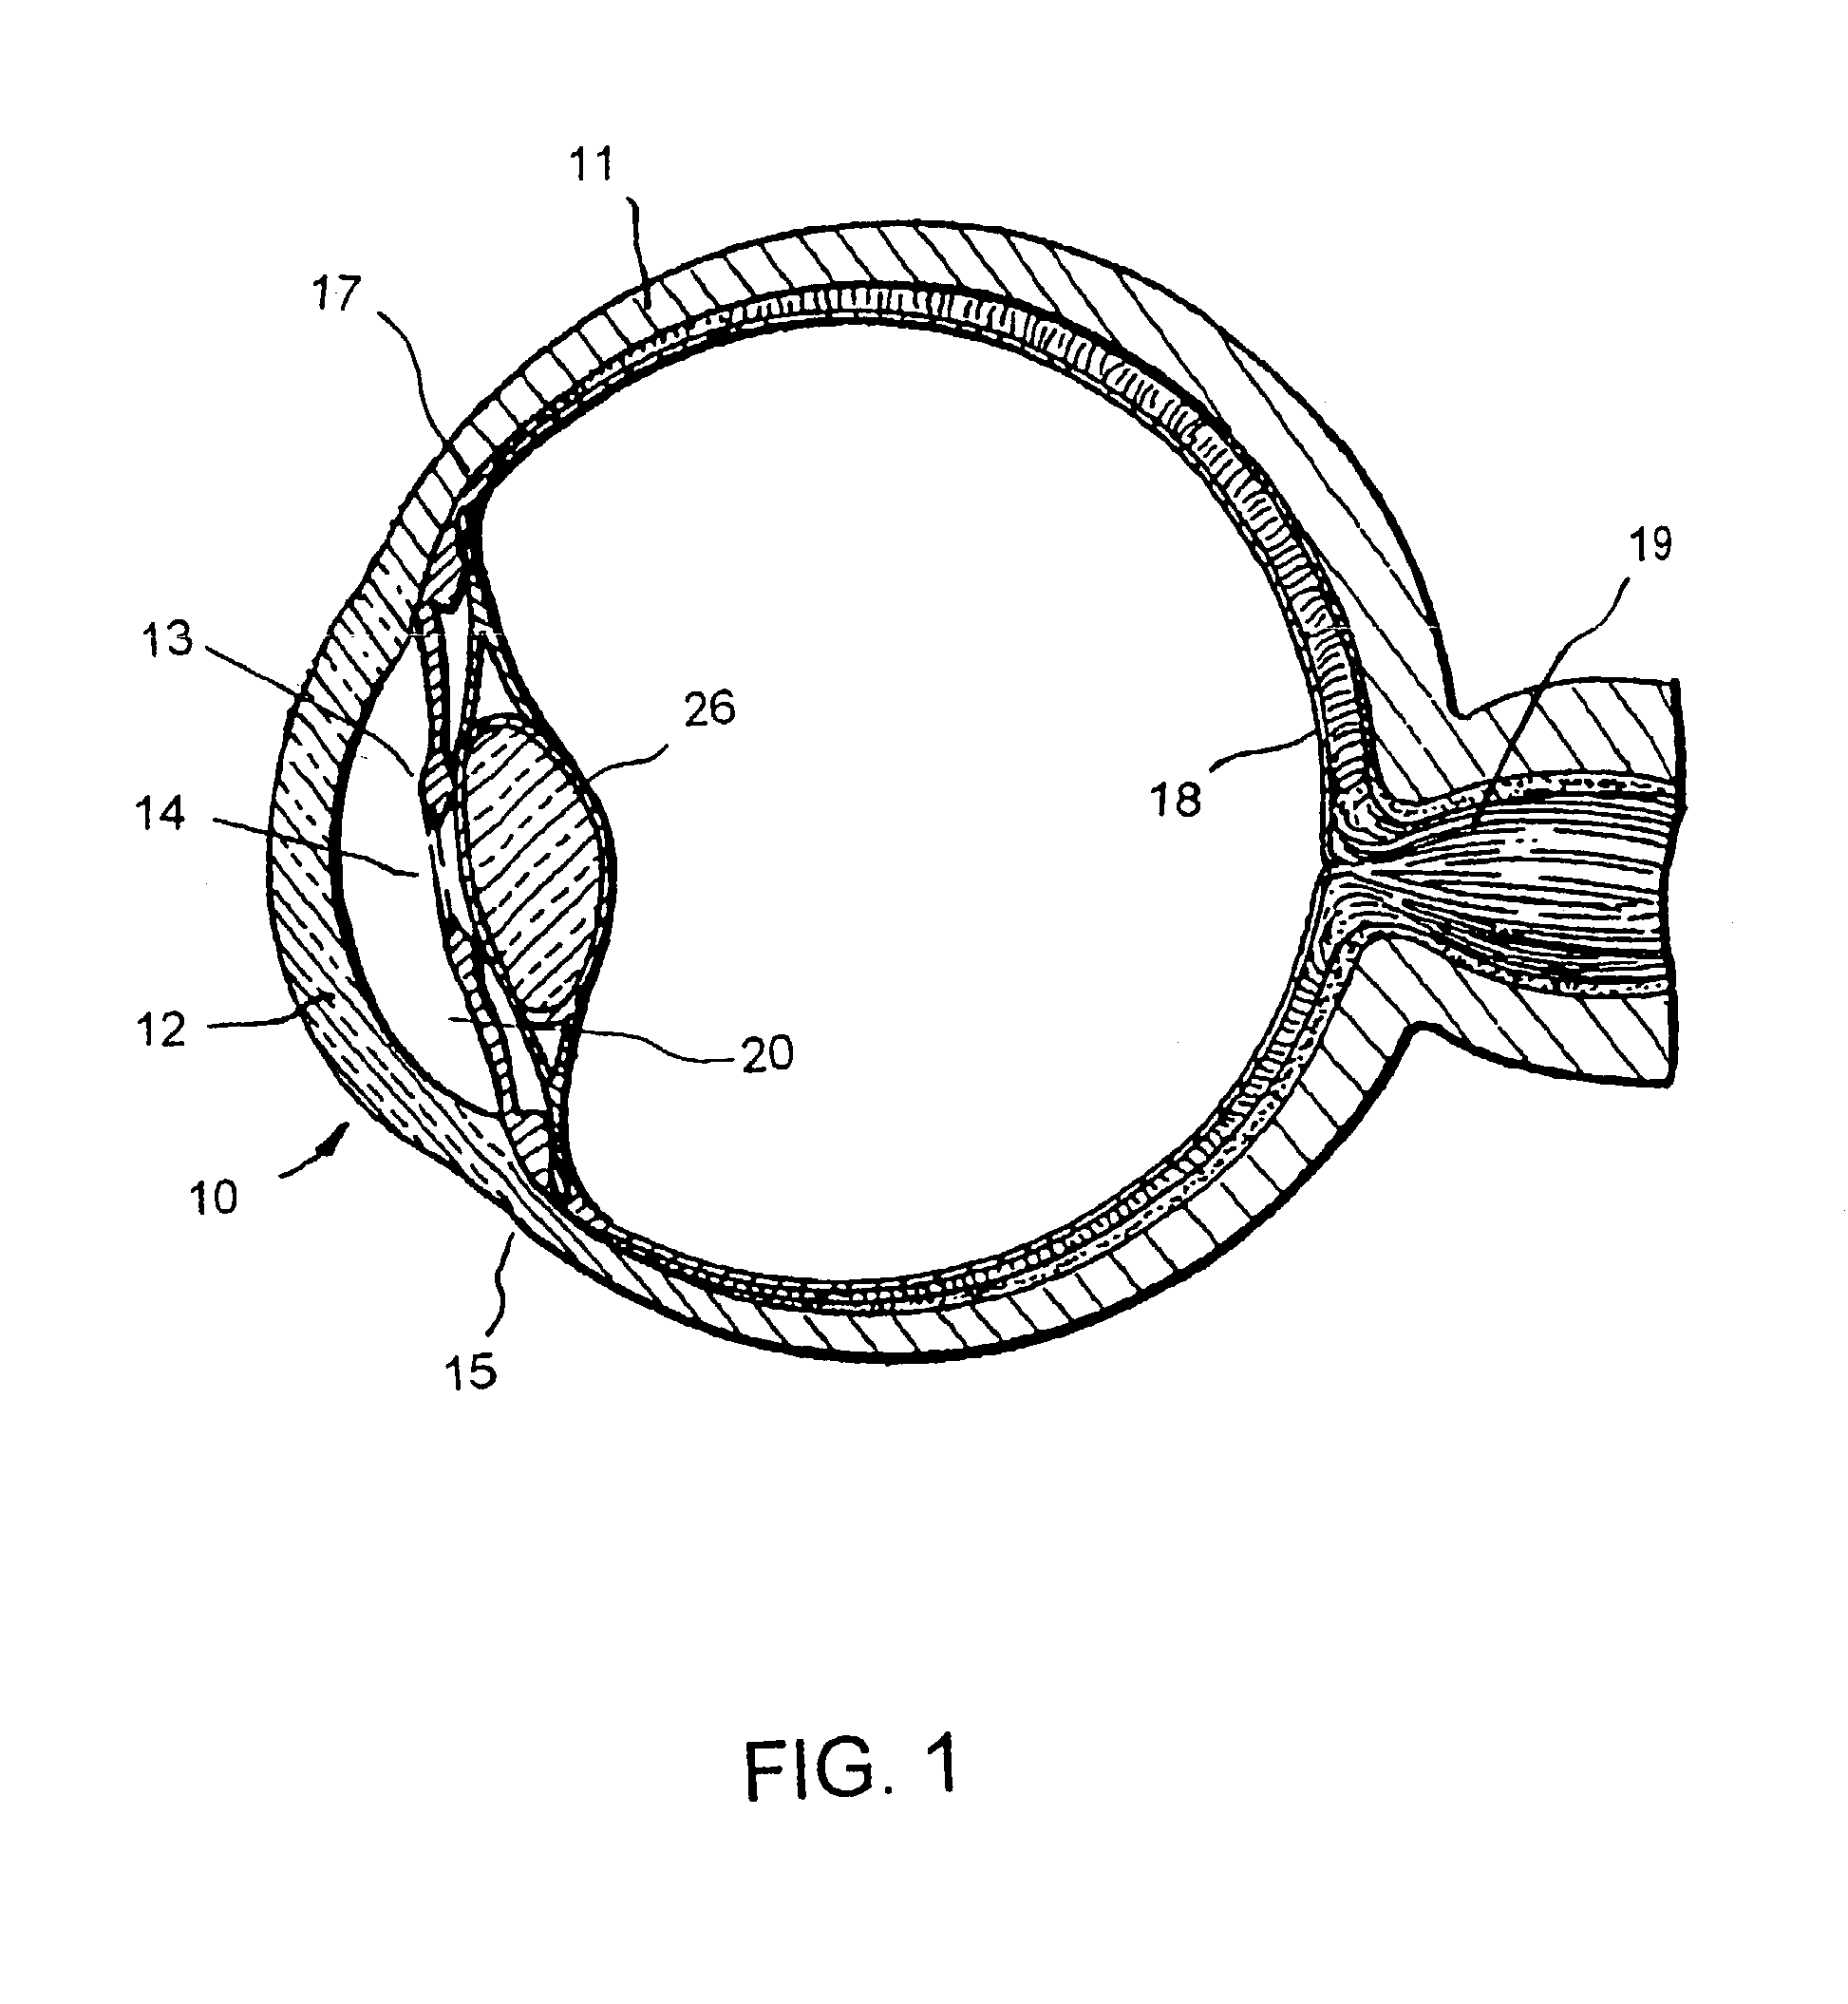 Fluid infusion methods for glaucoma treatment